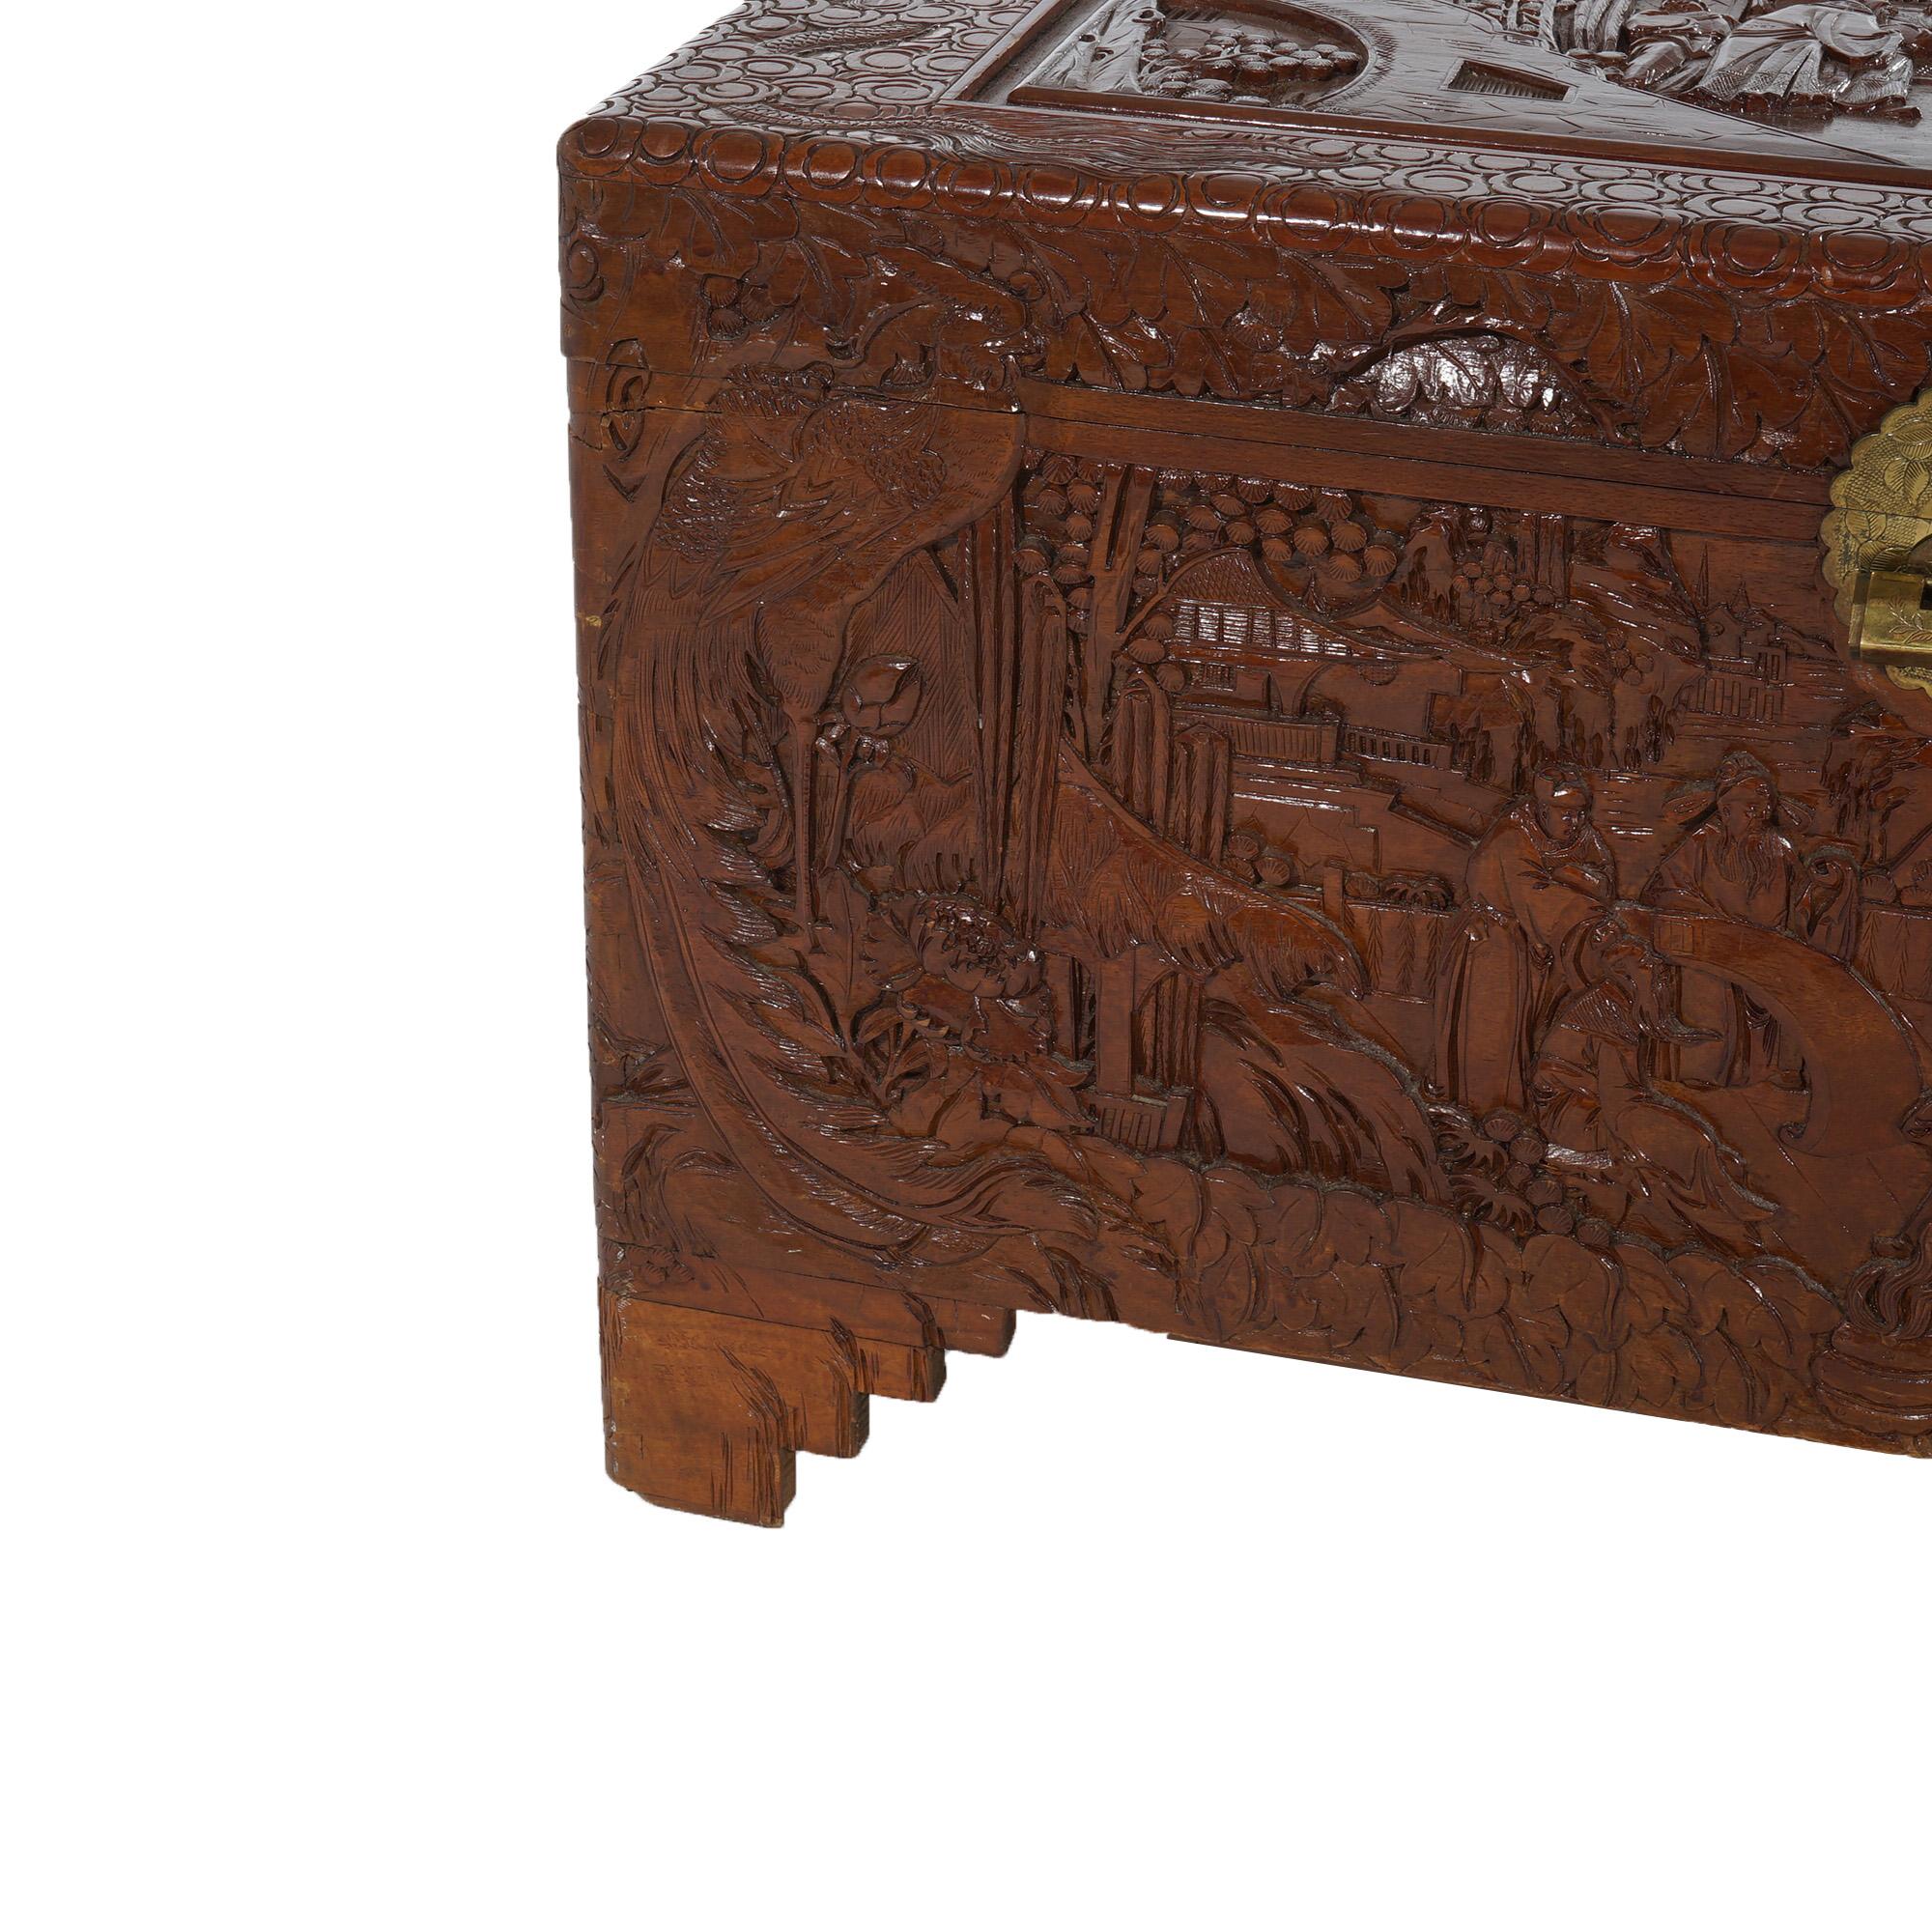 Chinese Carved Hardwood Figural Blanket Chest with Village Scene in Relief 20thC For Sale 3